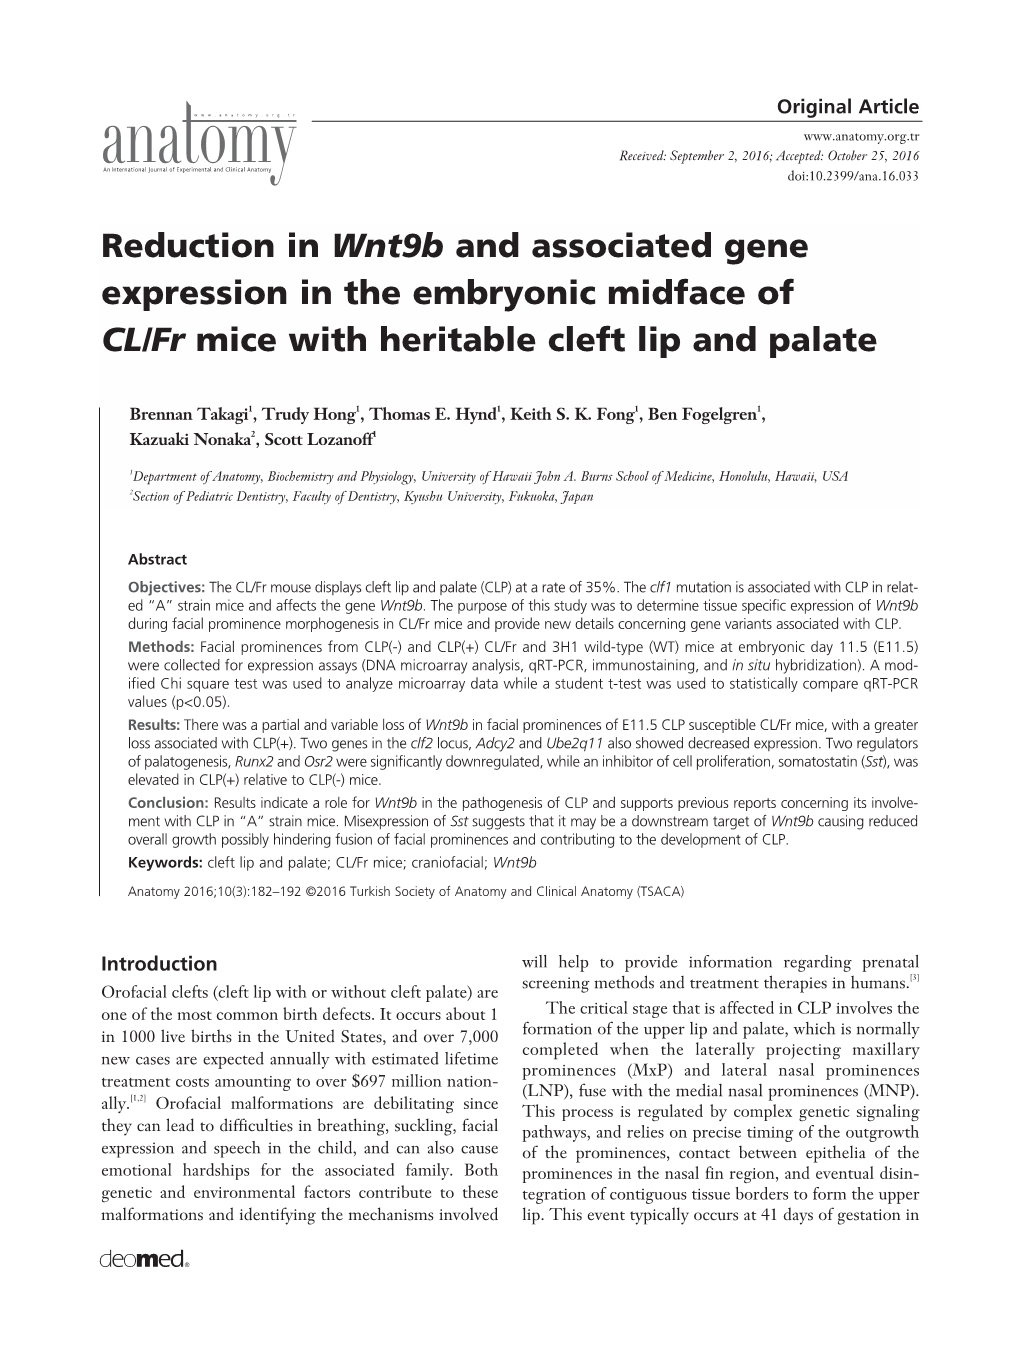 Reduction in Wnt9b and Associated Gene Expression in the Embryonic Midface of CL/Fr Mice with Heritable Cleft Lip and Palate